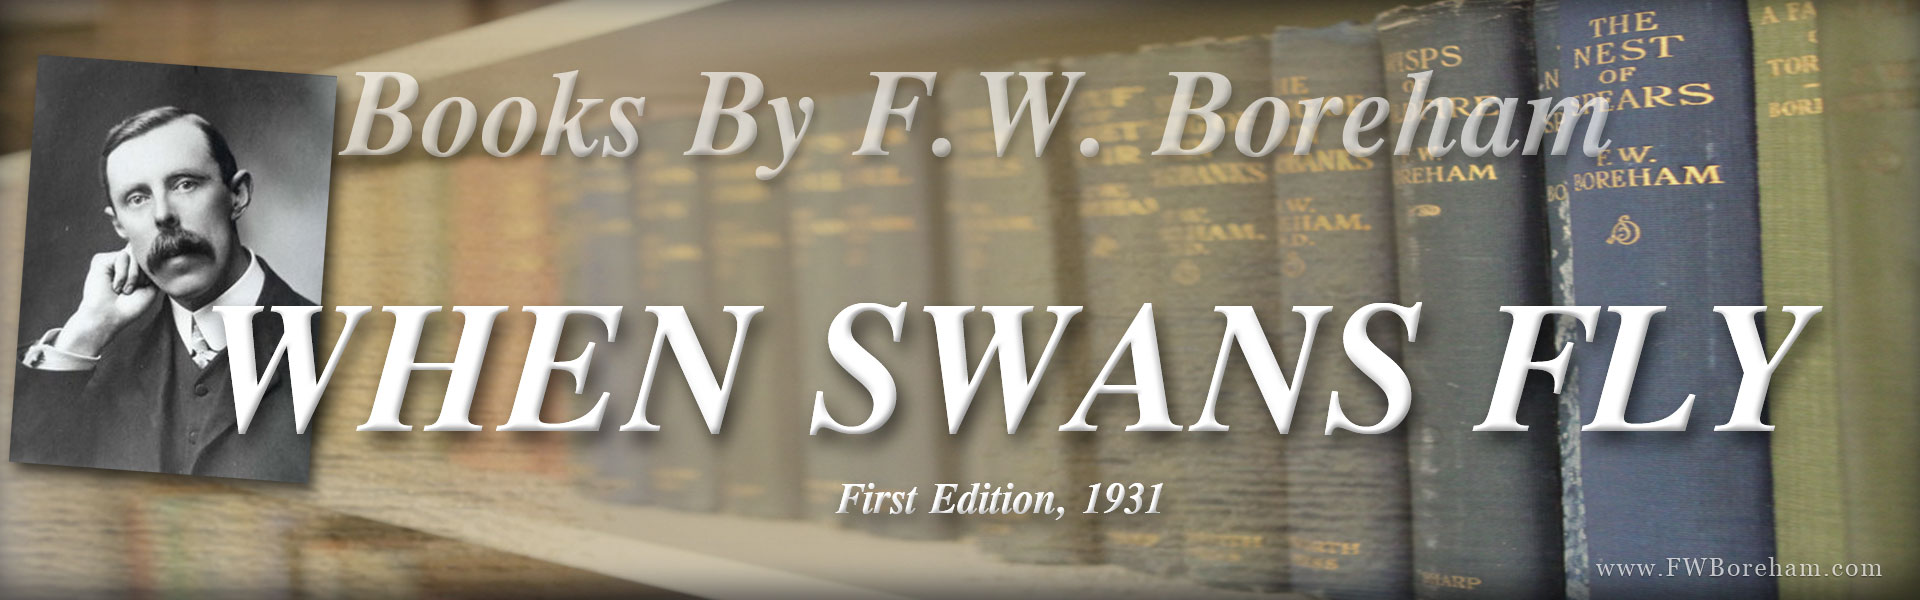 WHEN SWANS FLY HIGH, by Dr. F.W. Boreham